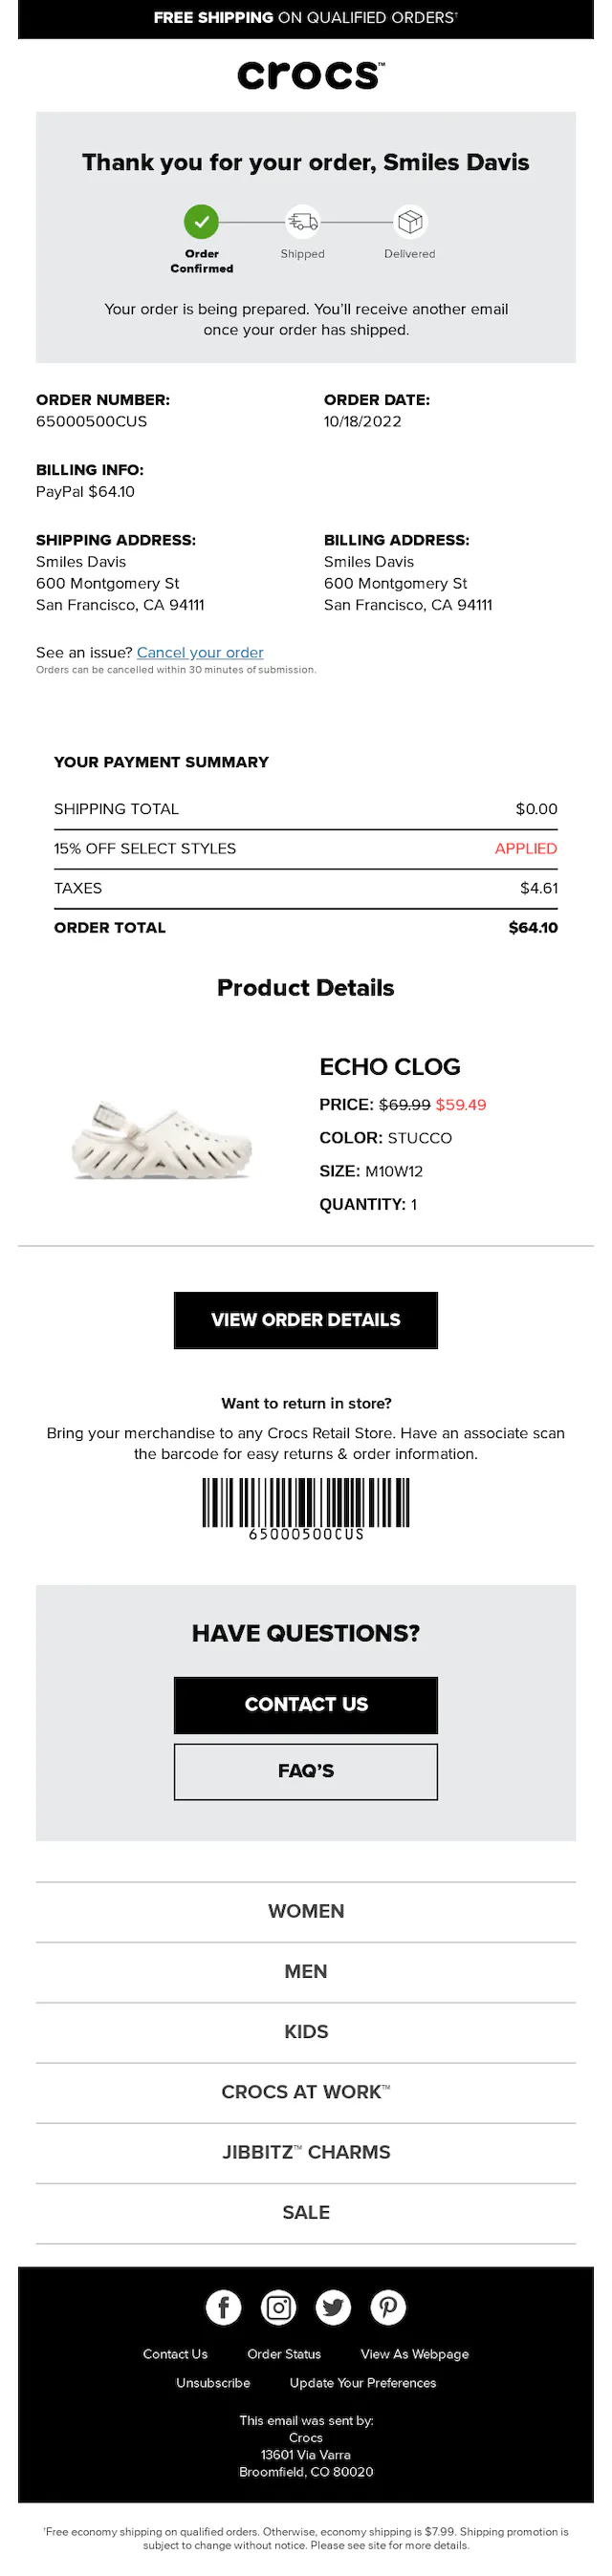 Screenshot of the Crocs Confirmation email template email